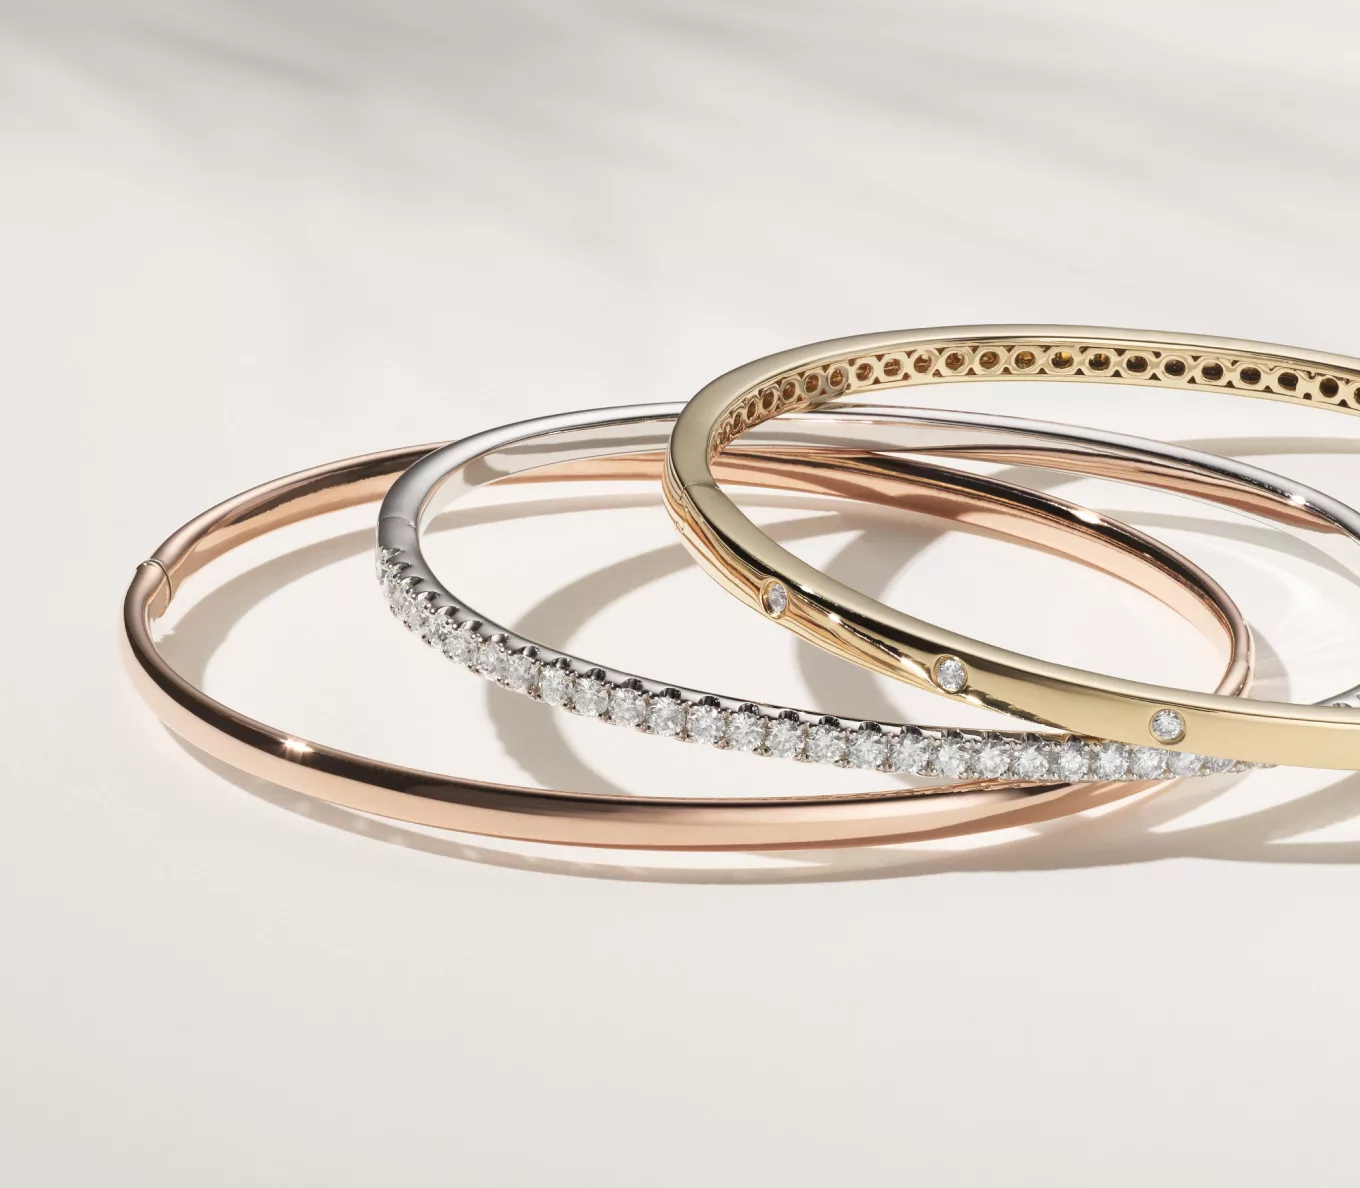 jewelry gifts under $2500: gold and diamond bracelets. 14k Rose Gold Bangle Bracelet (7.25 in)
This sleek and stylish 14-karat rose gold bangle bracelet will add high shine to any look. Perfect for daily wear, it features a convenient hinged opening and secure tongue clasp. 1 1/2 ct Pave Bangle Bracelet (7 in)
This dazzling pavé bangle bracelet will deliver hand-matched sparkle and fire to any look. Crafted in bright 14-karat white gold, it features a tongue clasp and safety lock for secure daily wear. Diamond Bangle Bracelet (7.5 in)
Dotted with natural diamond accents, this bangle bracelet will add a little shimmer to any look. Crafted in warm 14-karat yellow gold, it features a tongue clasp and safety lock for secure daily wear.